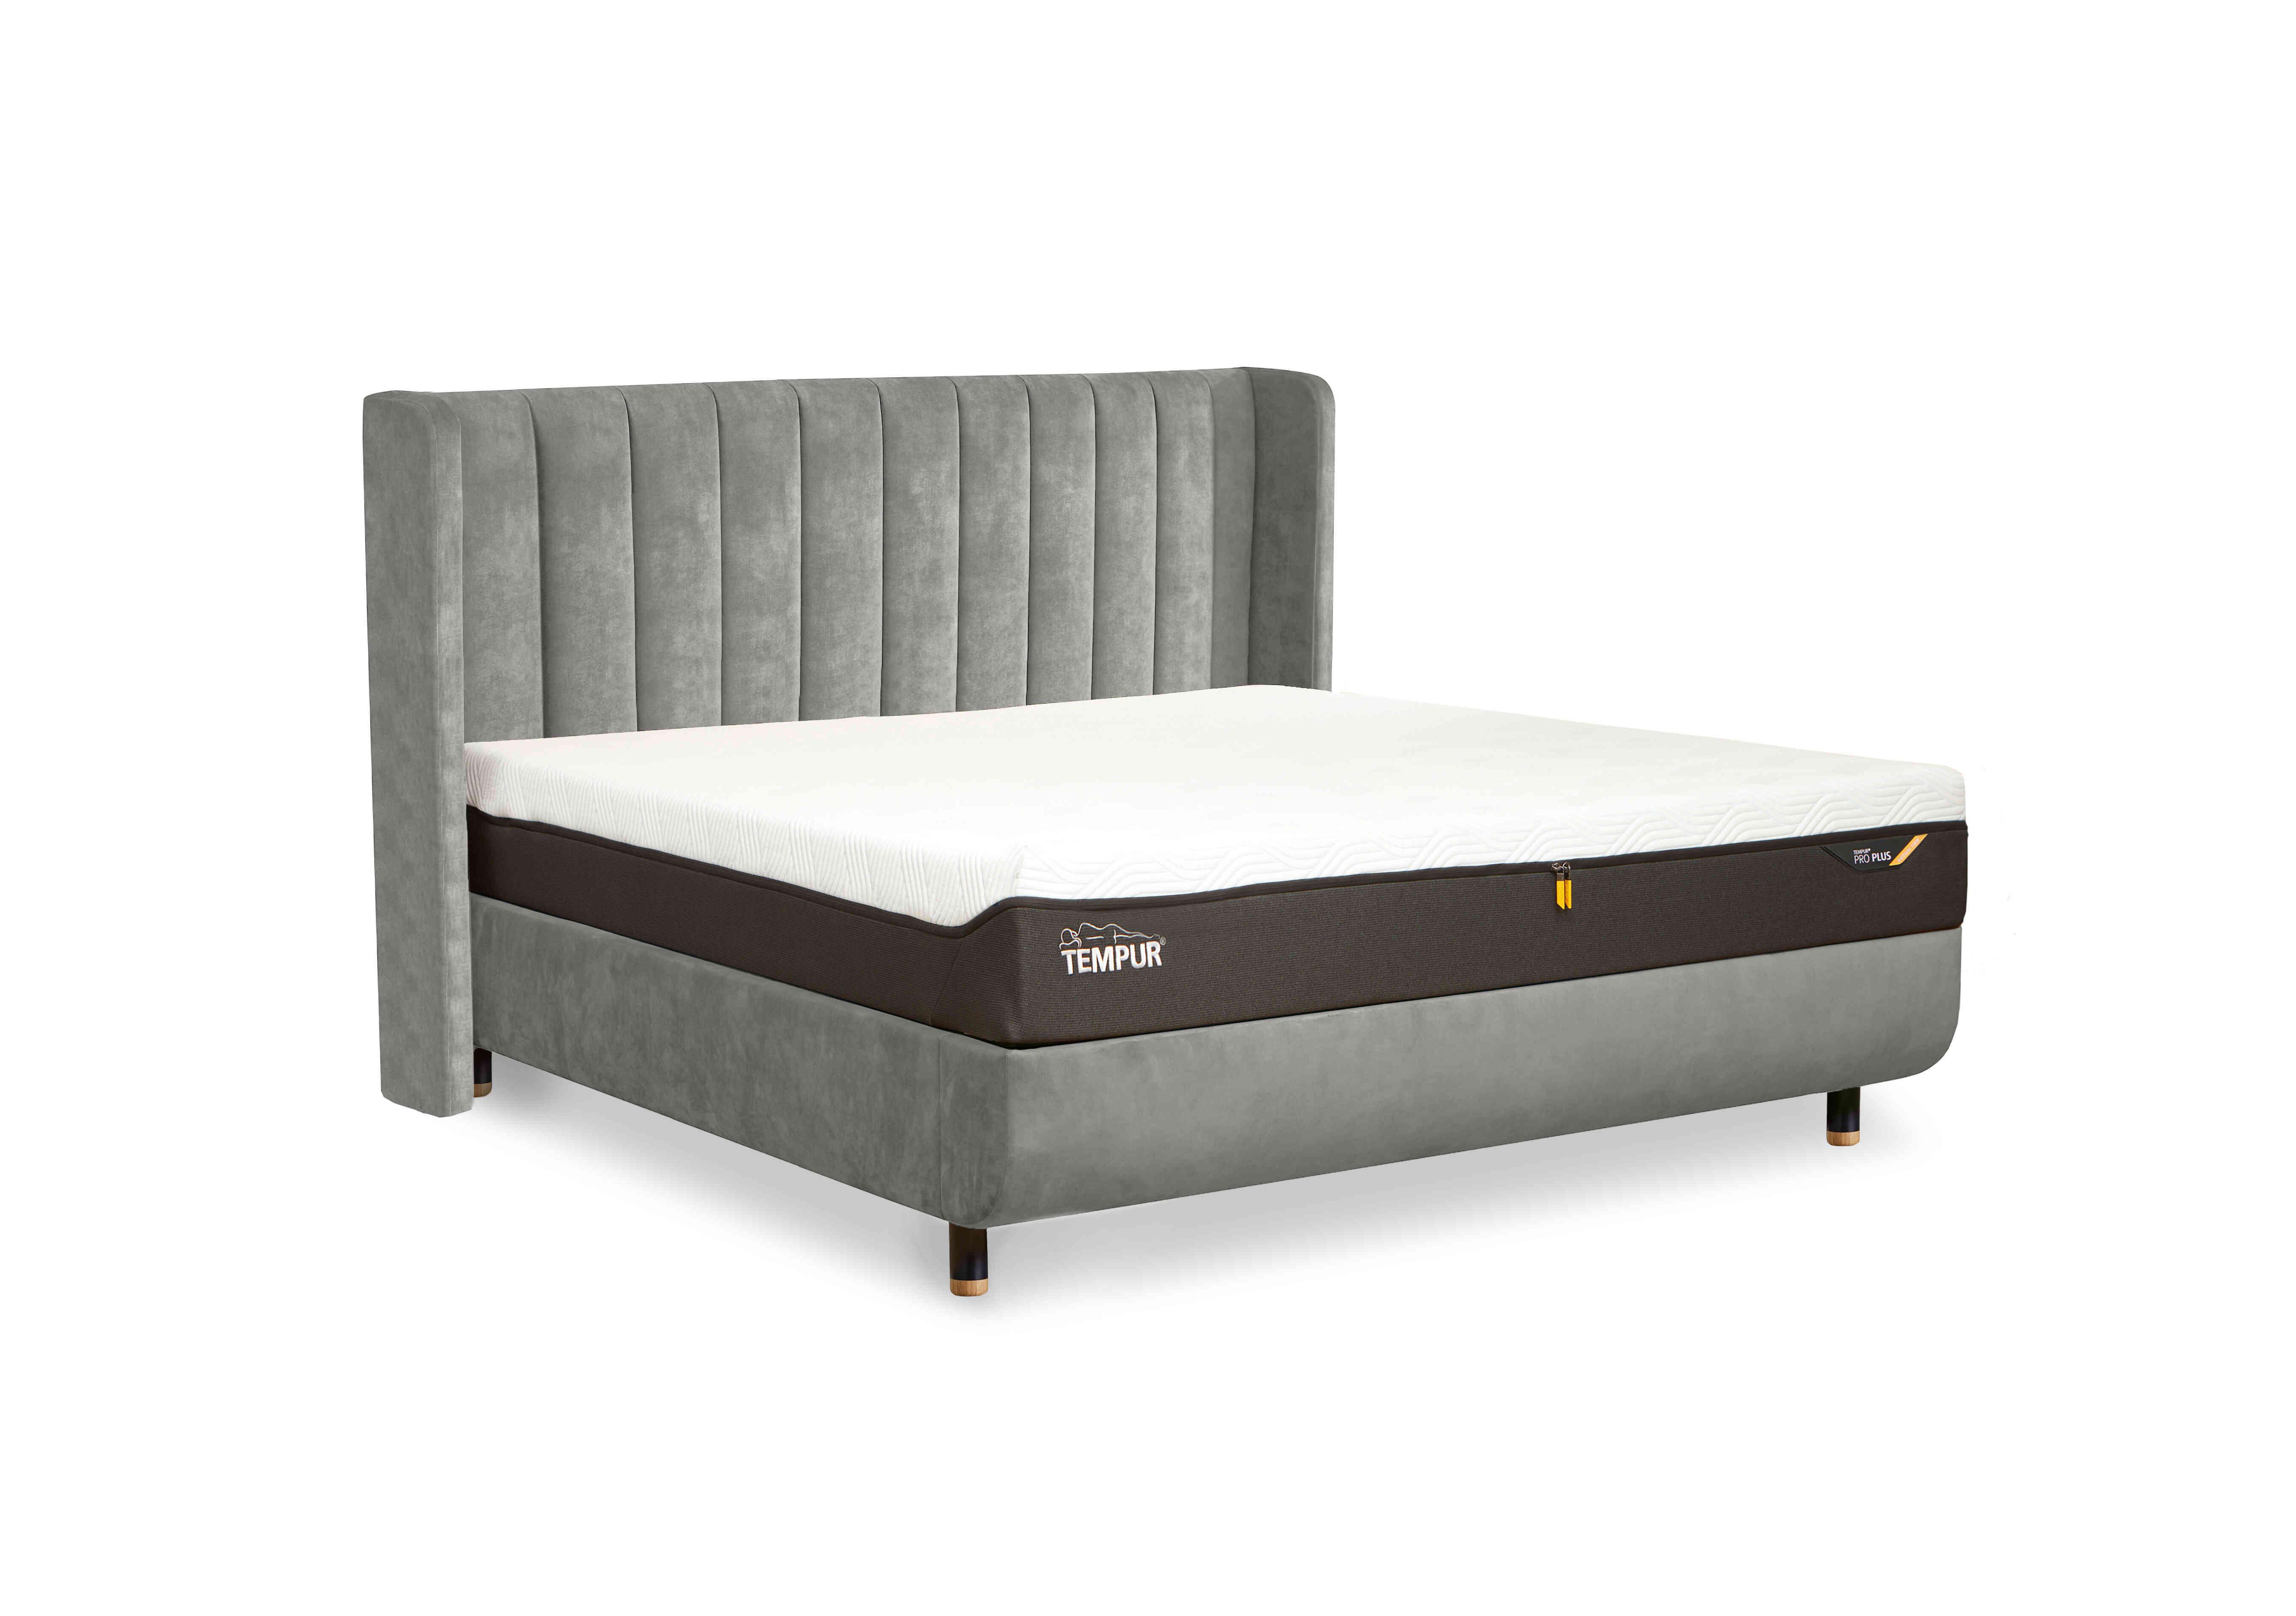 Arc Slatted Ottoman Bed Frame with Lodret Headboard in Stone-Natural Ash Feet on Furniture Village